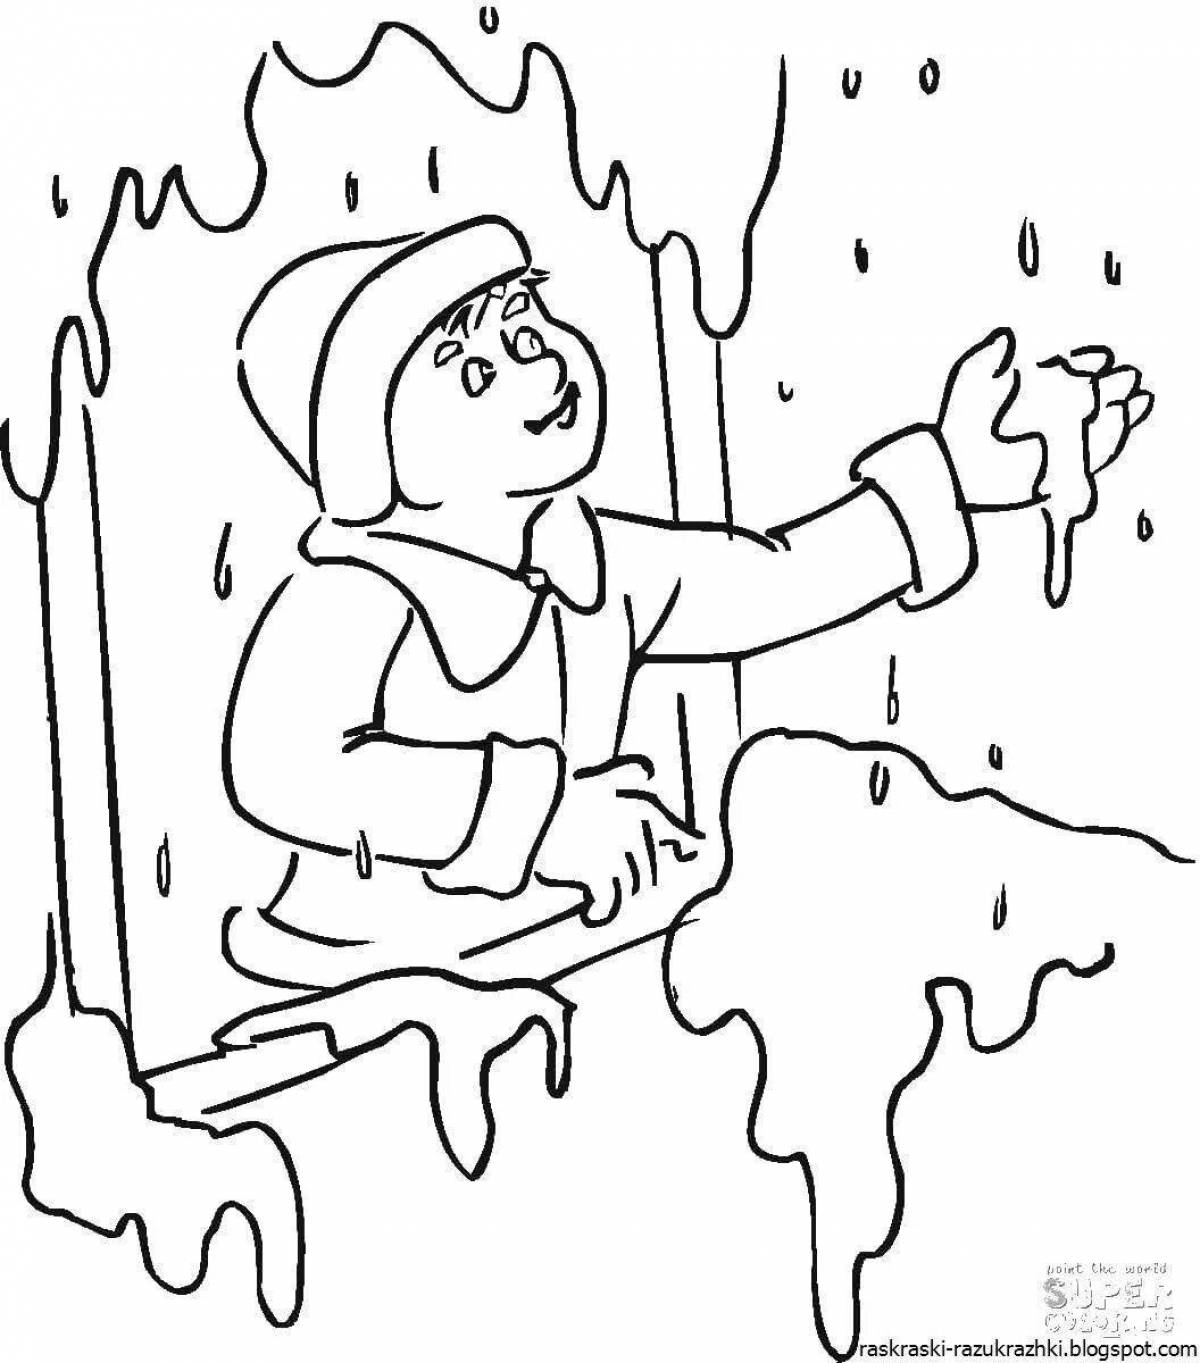 Playful coloring page in early spring